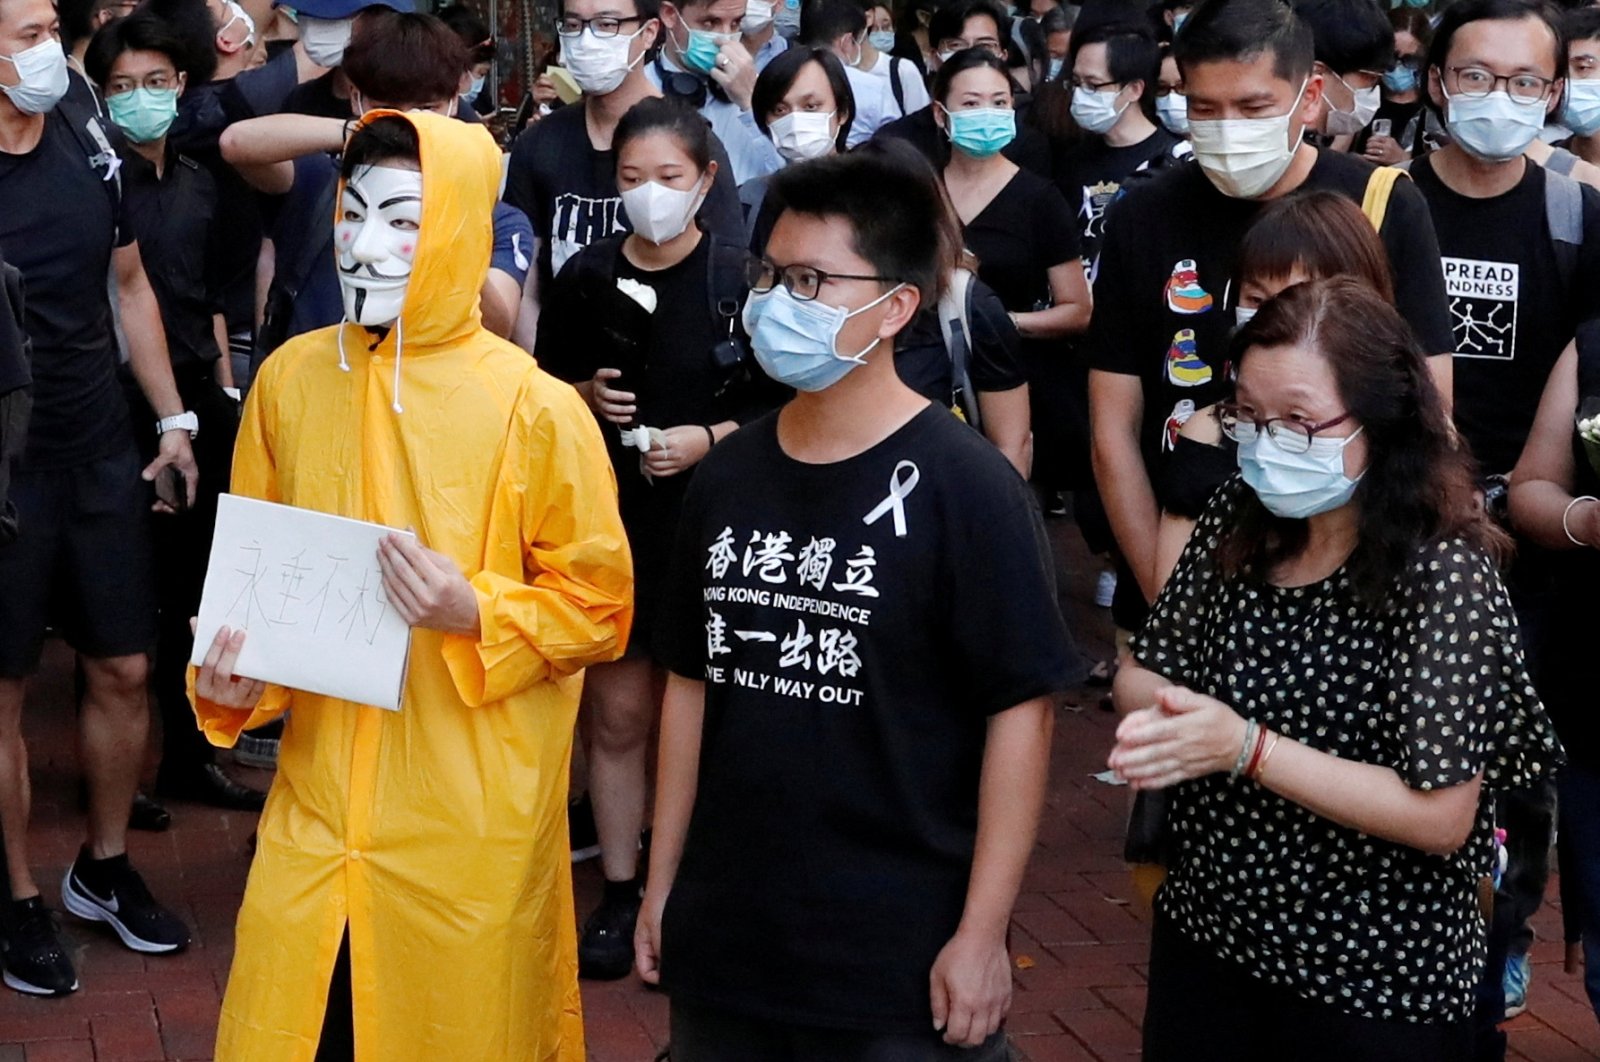 Hong Kong activist dubbed &quot;Captain America 2.0&quot; Ma Chun-man attends a vigil for a protester Marco Leung Ling-kit who fell to his death during a demonstration outside the Pacific Place mall, in Hong Kong, China, June 15, 2020. (Reuters Photo)